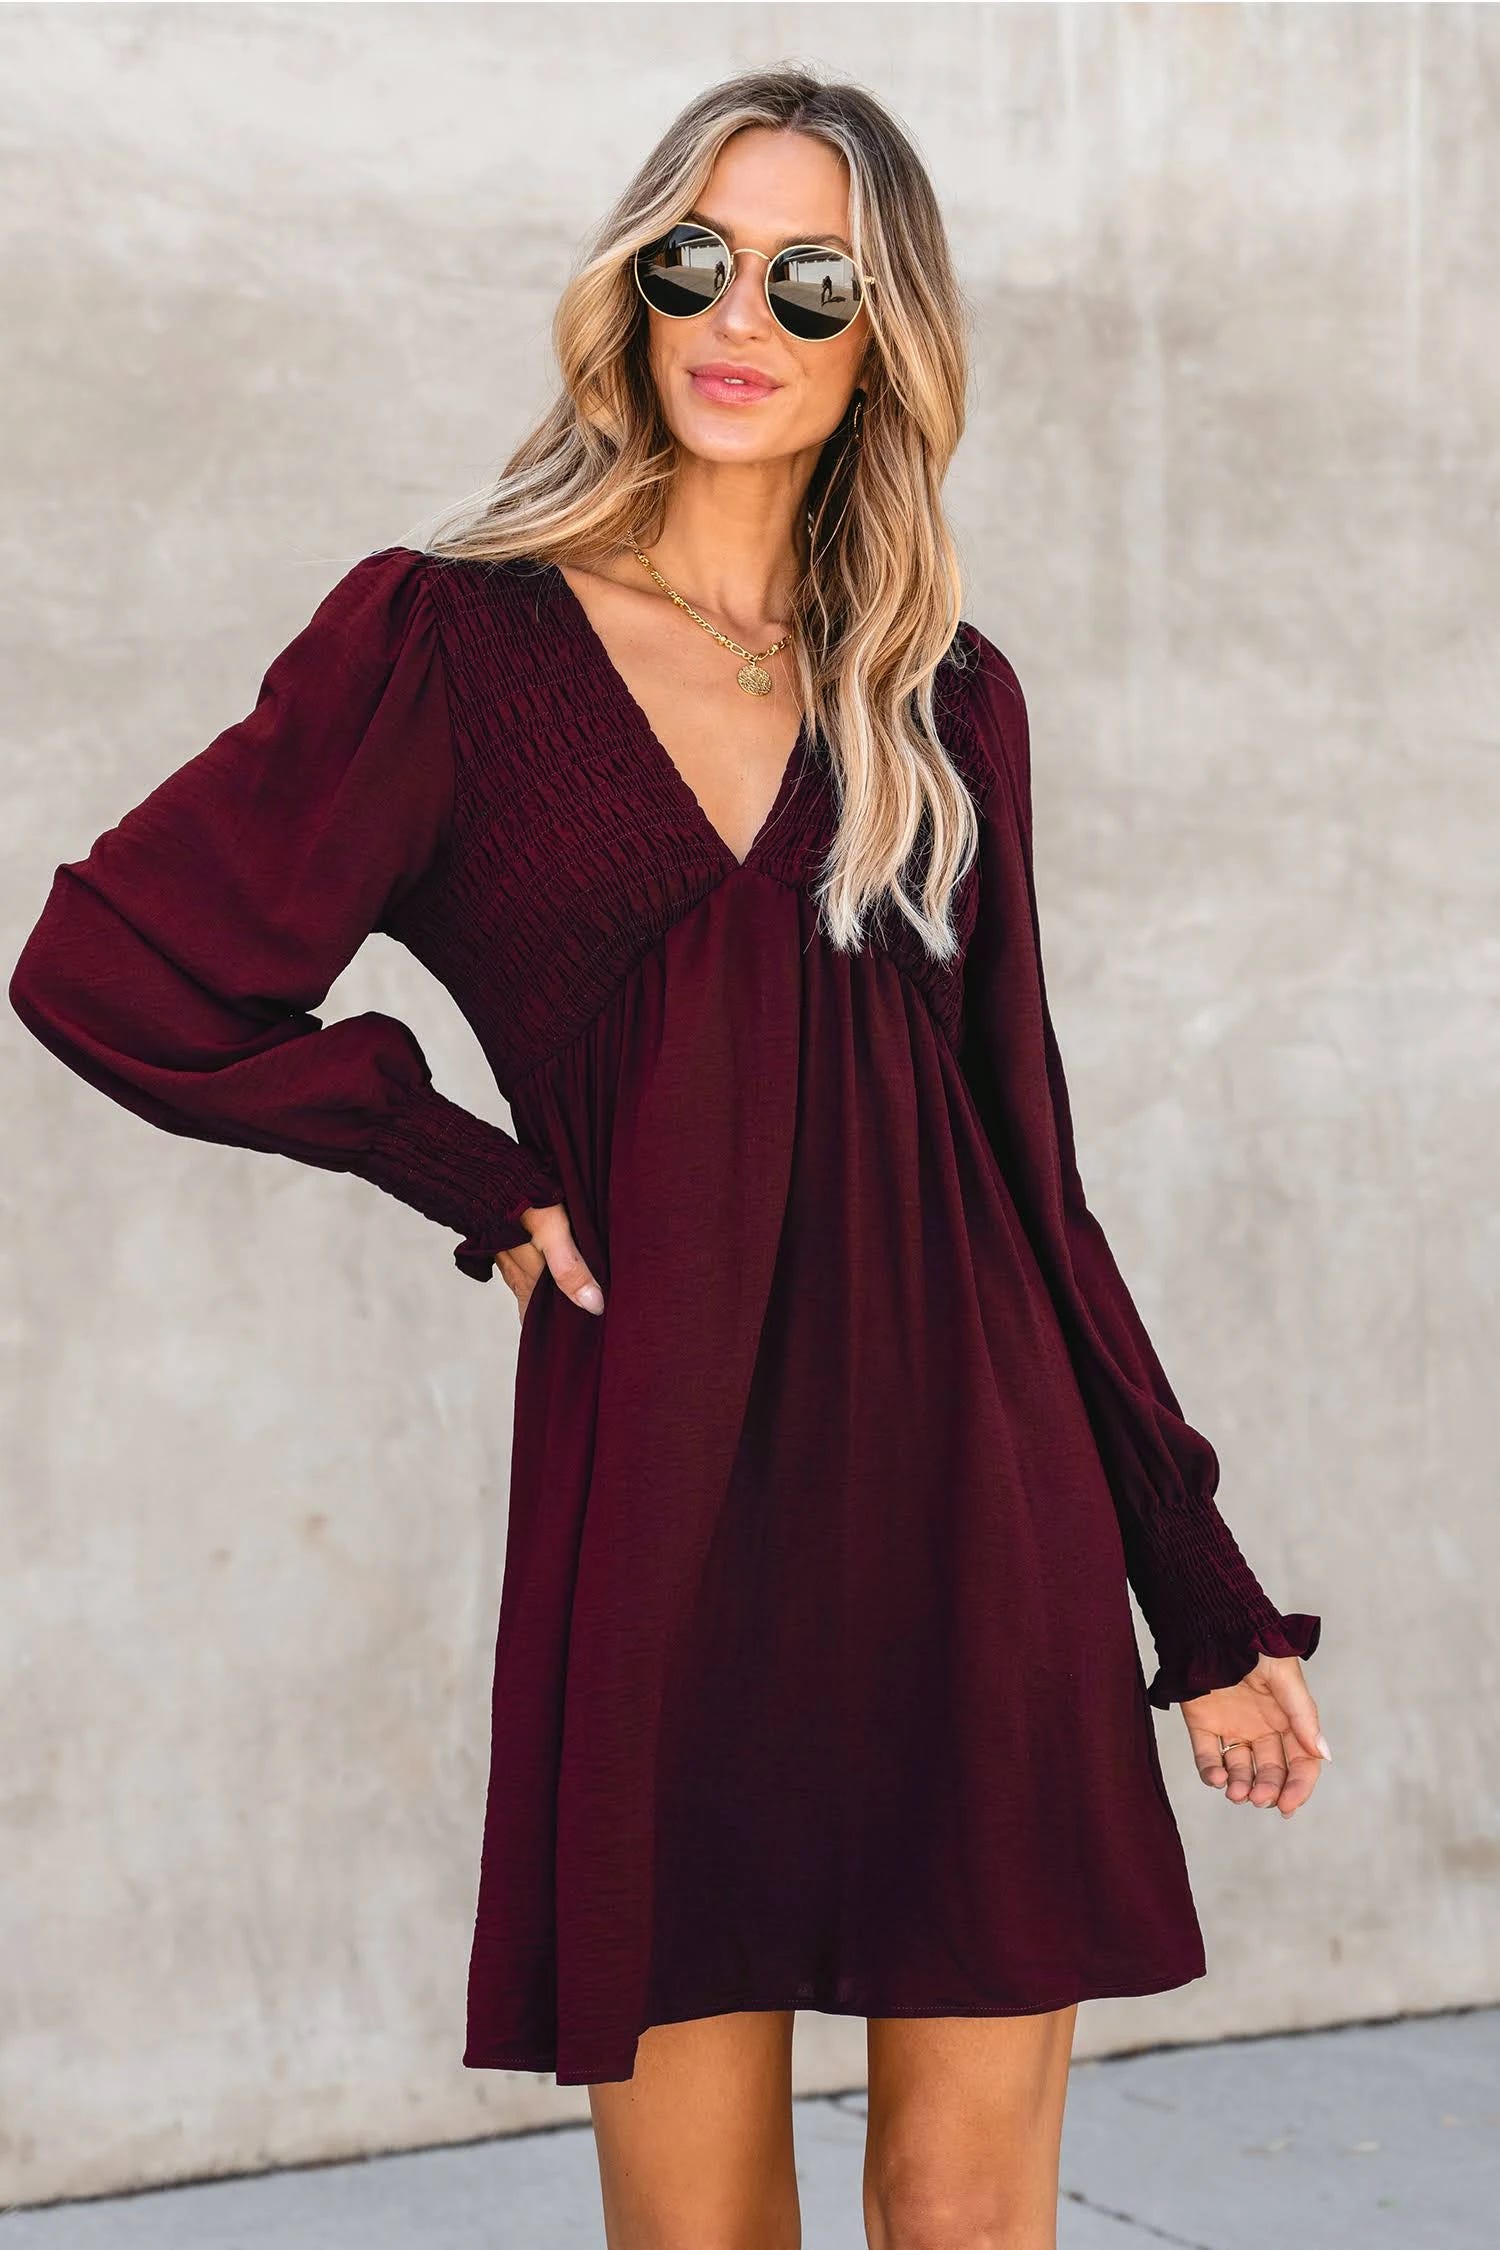 Burgundy V-Neck Mini Dress with Empire Waist and Long Sleeves | Image